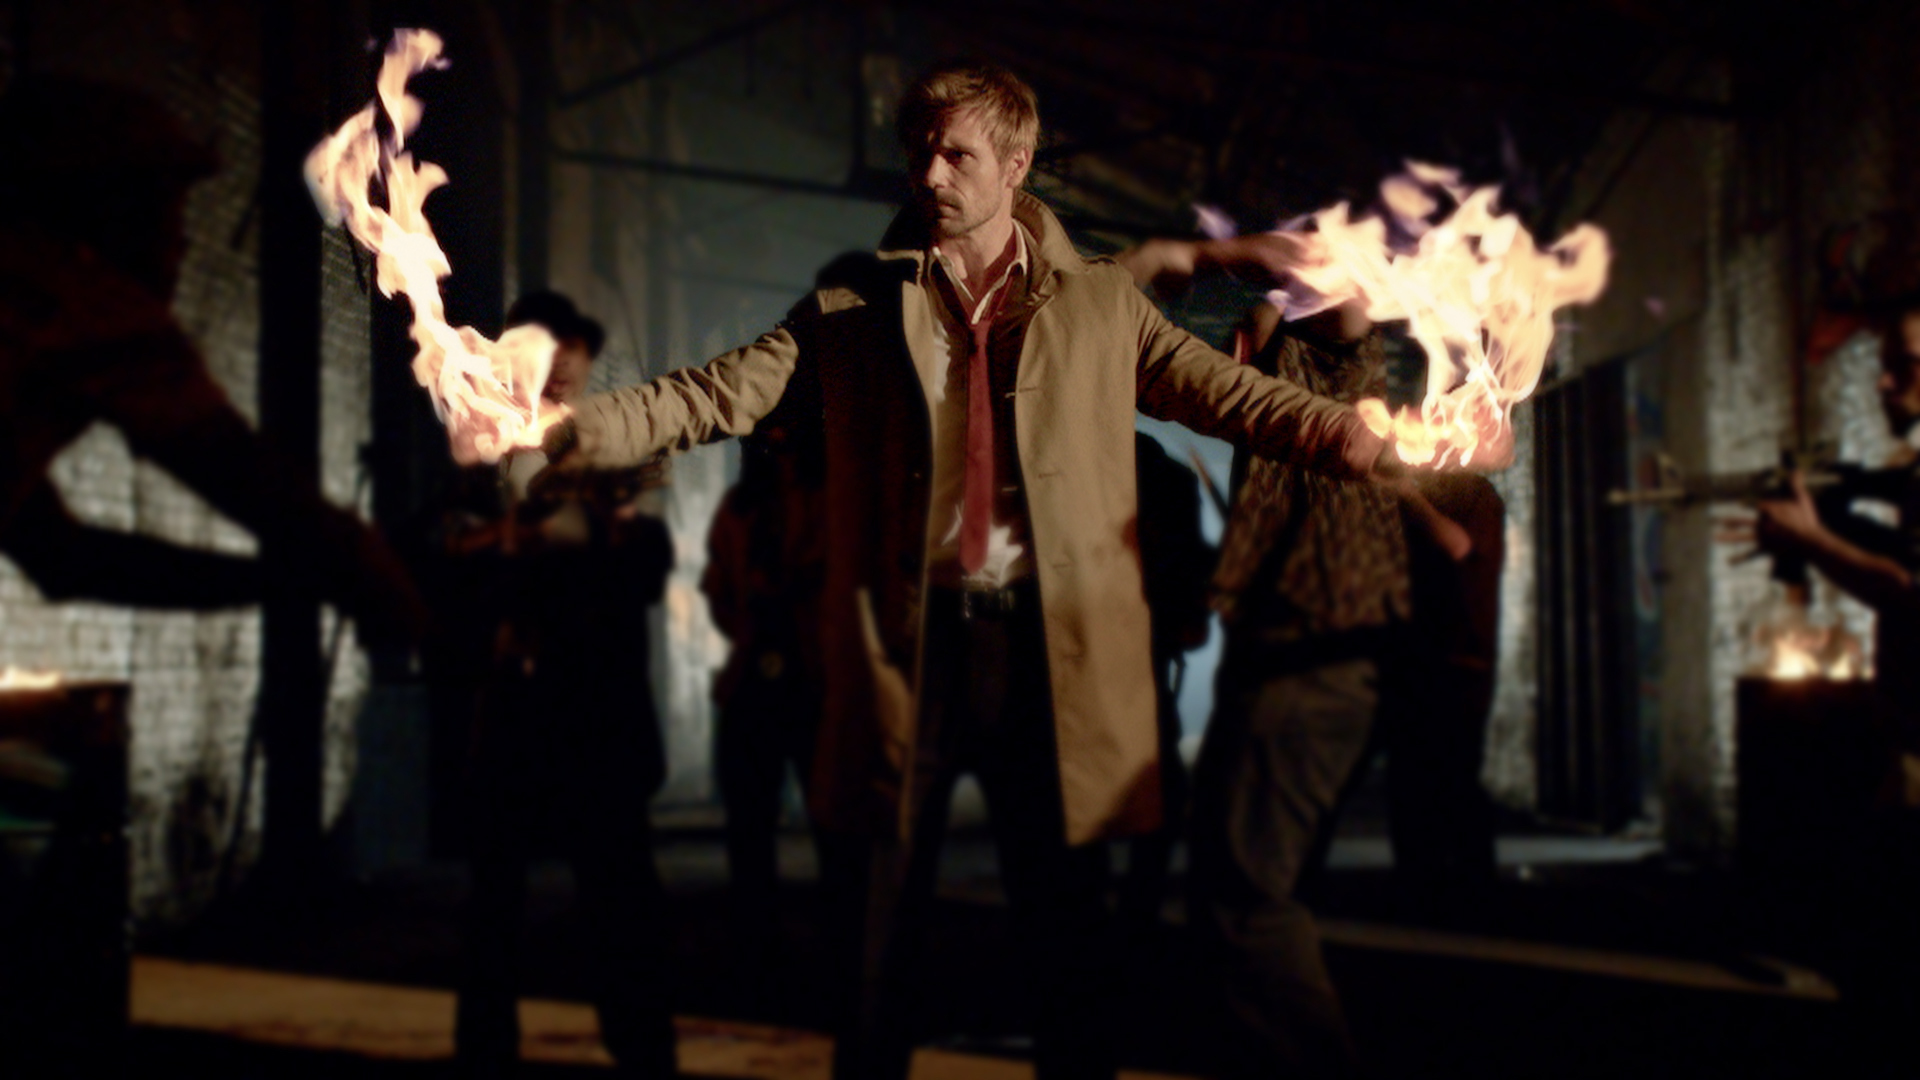 CONSTANTINE POST-MORTEM[?] :  A few words about networks’ rating-based decisions and not letting the media break your fan-spirit